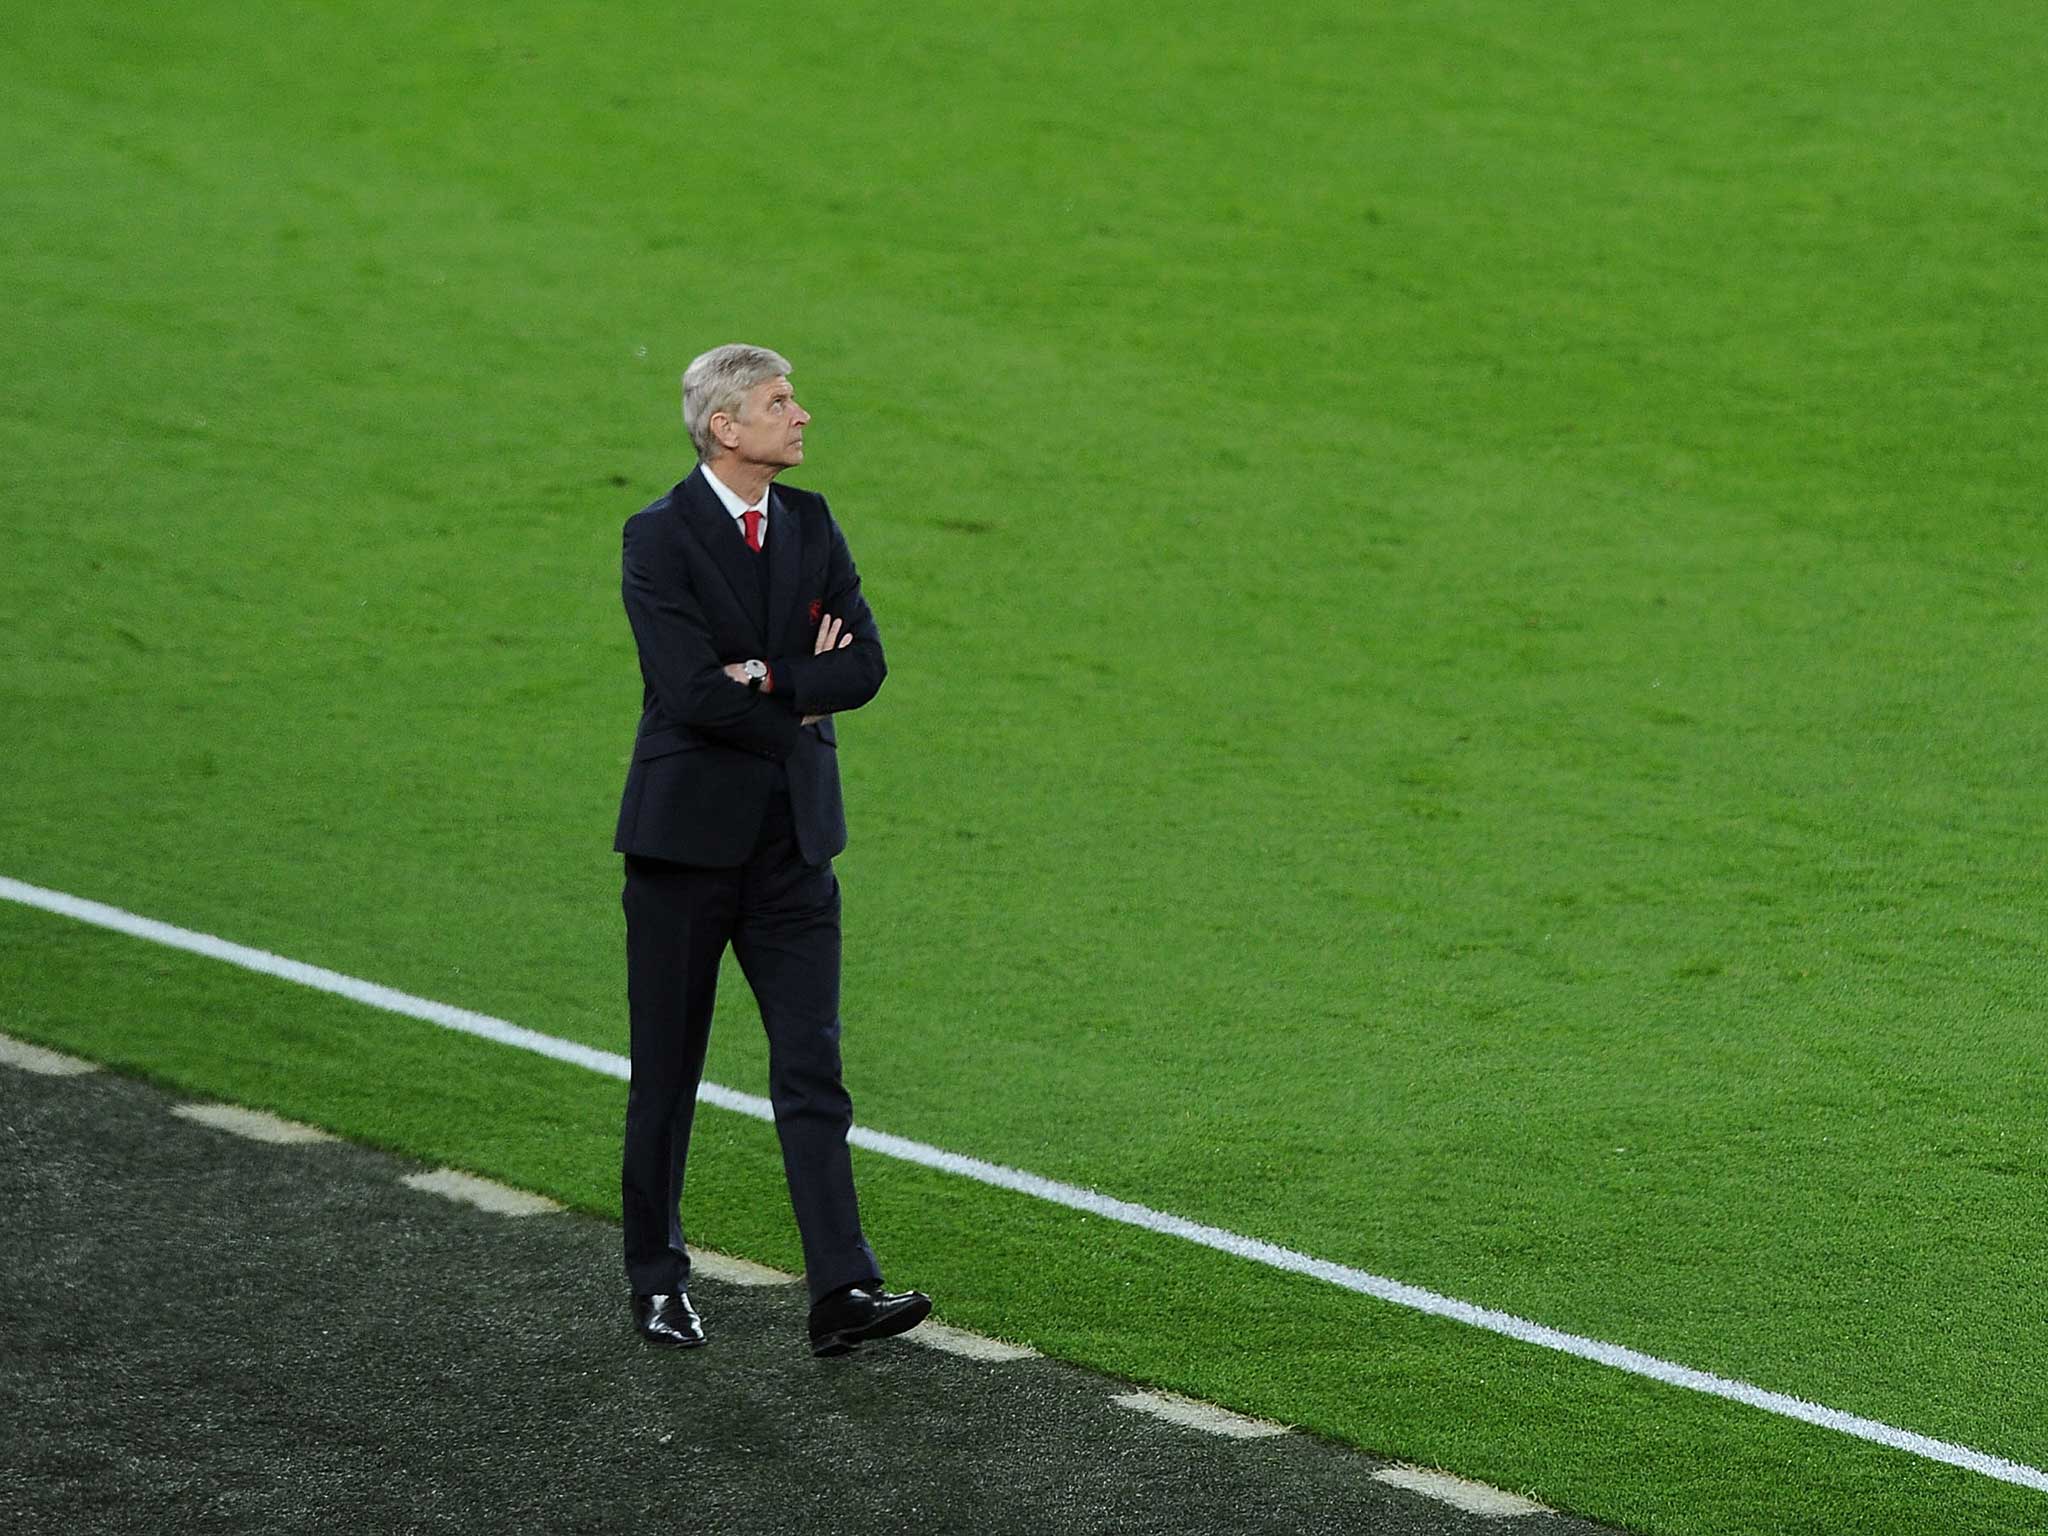 Arsene Wenger has continued to struggle in the Champions League